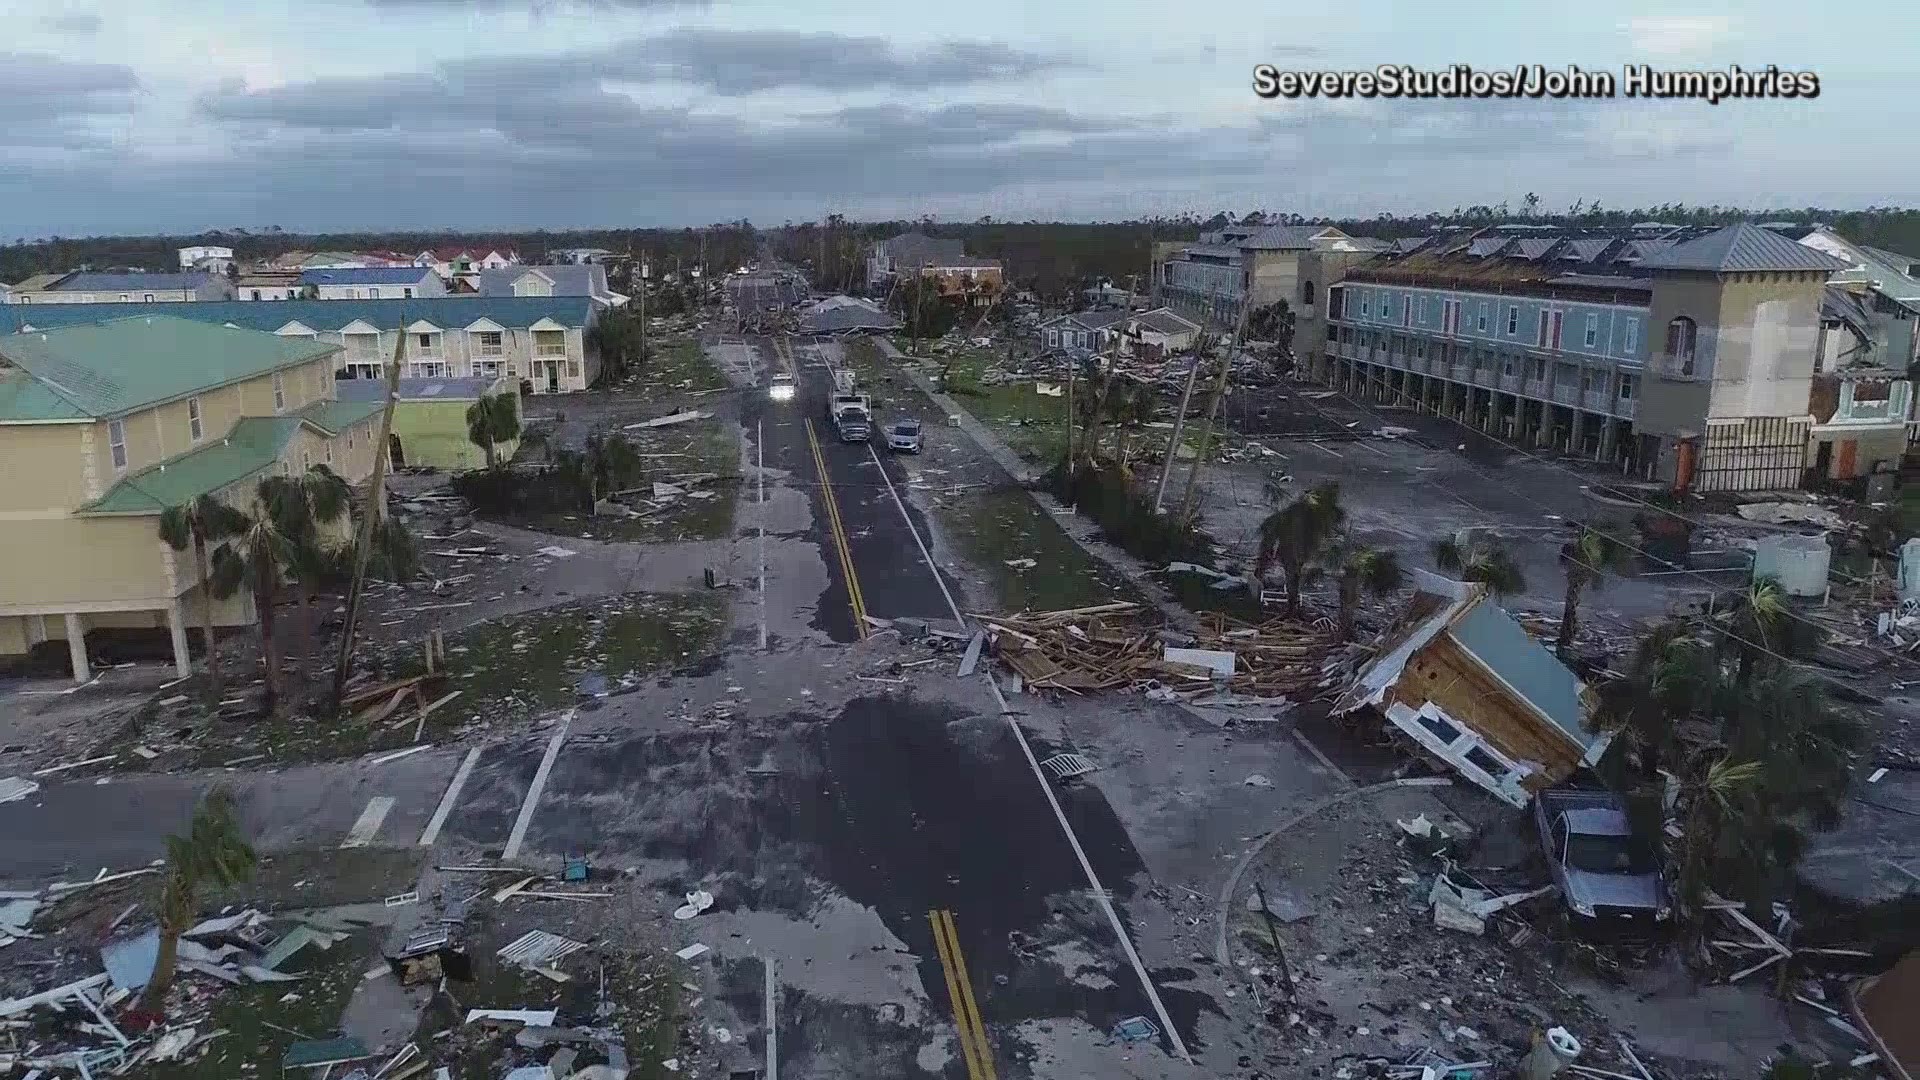 This video shared by NBC News shows the destruction left behind from Hurricane Michael after it slammed Mexico Beach, Florida with 155 mph winds.